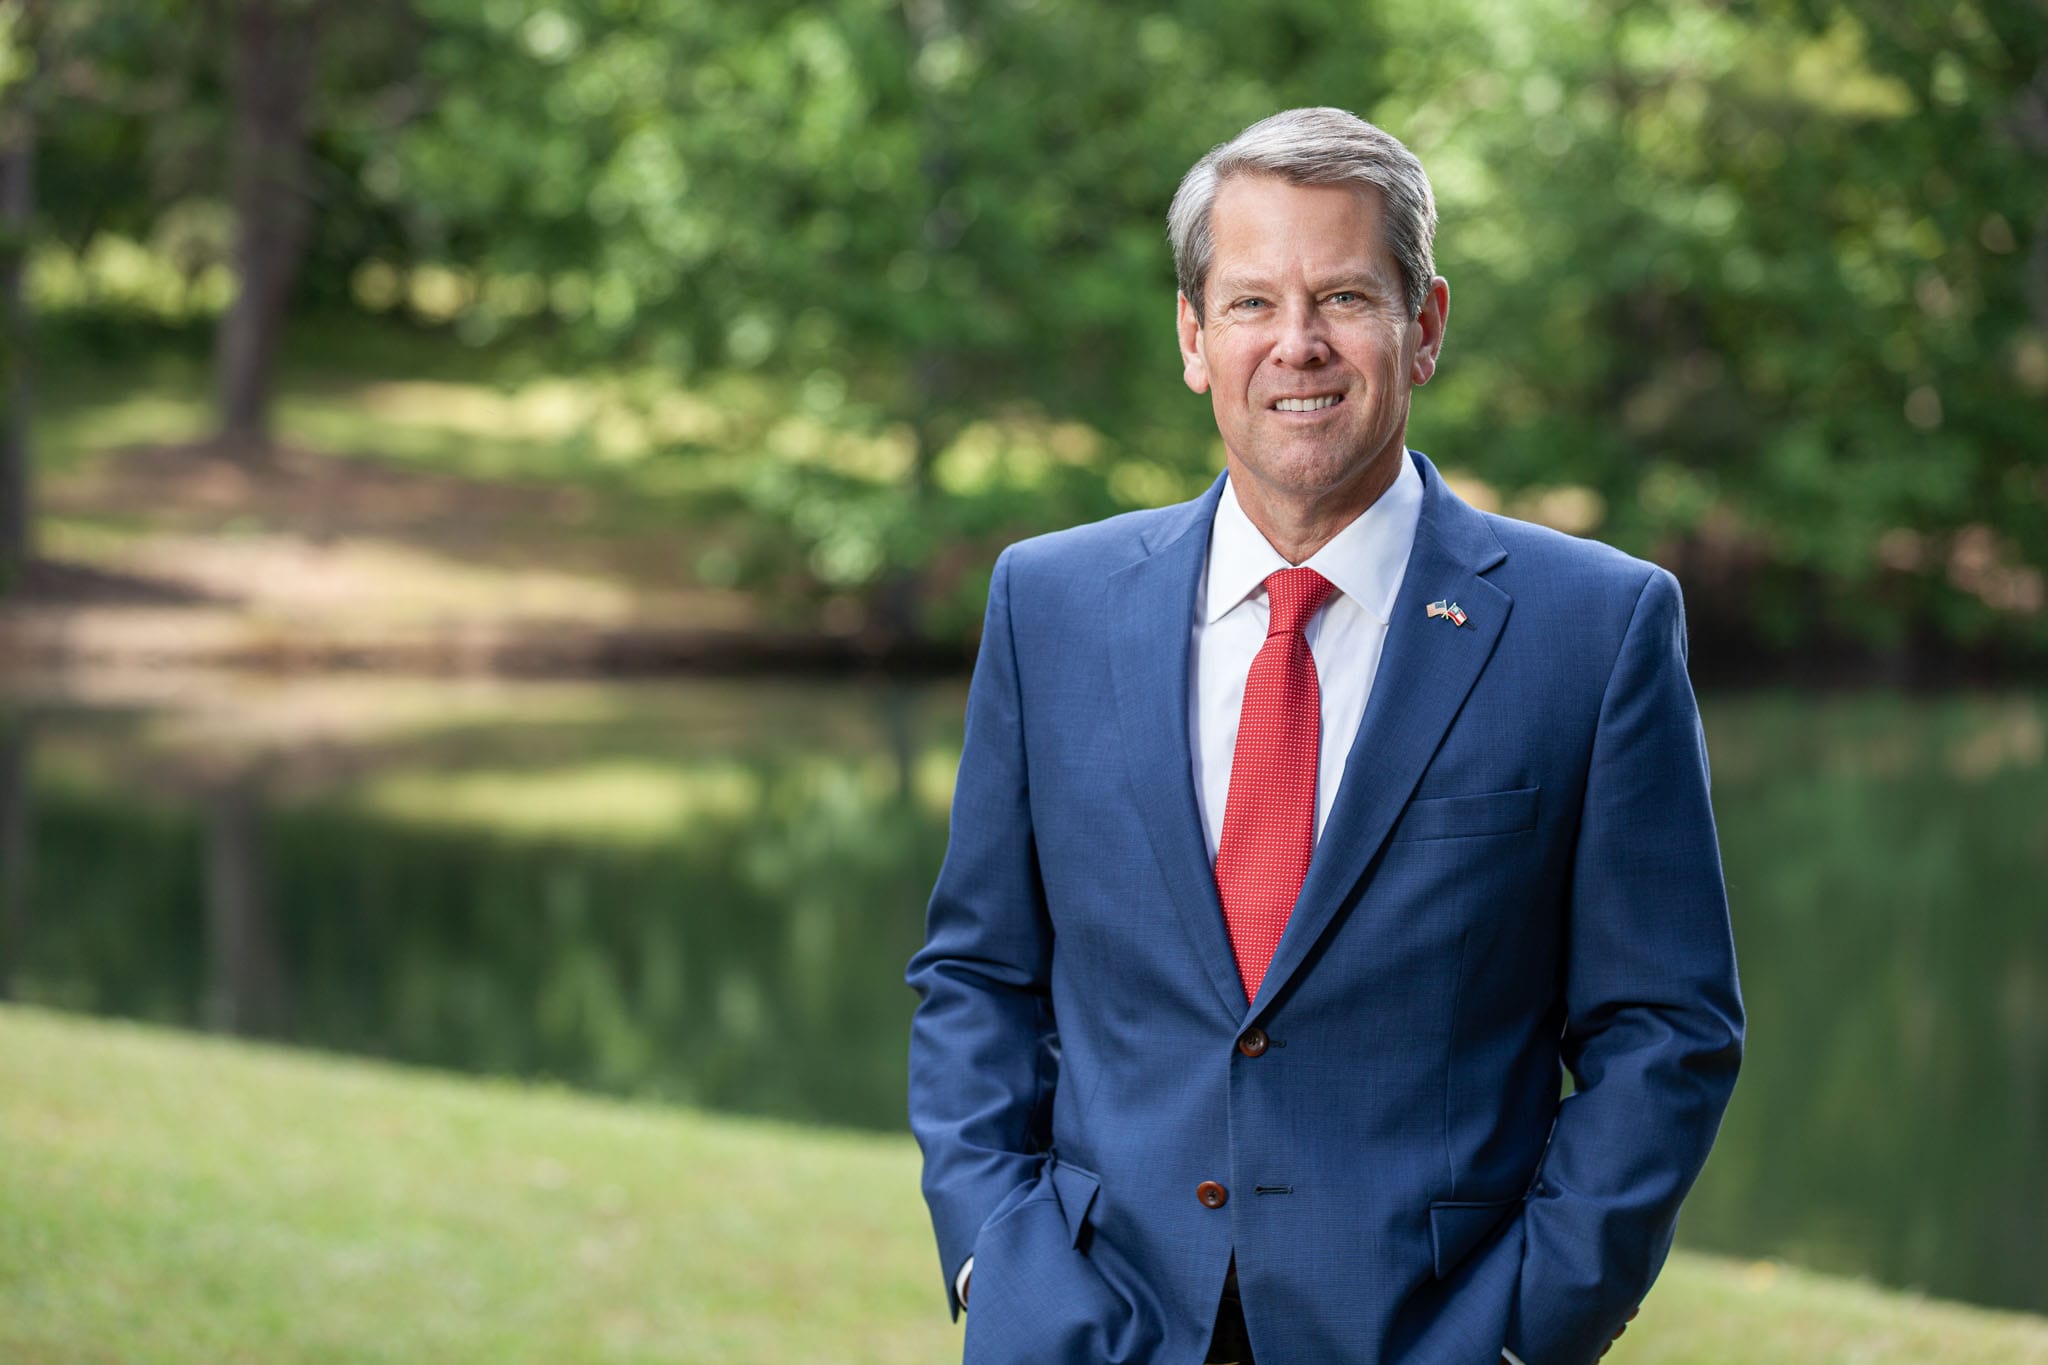 Georgia Governor Kemp standing in front of a pond in a blue suit with a red tie.